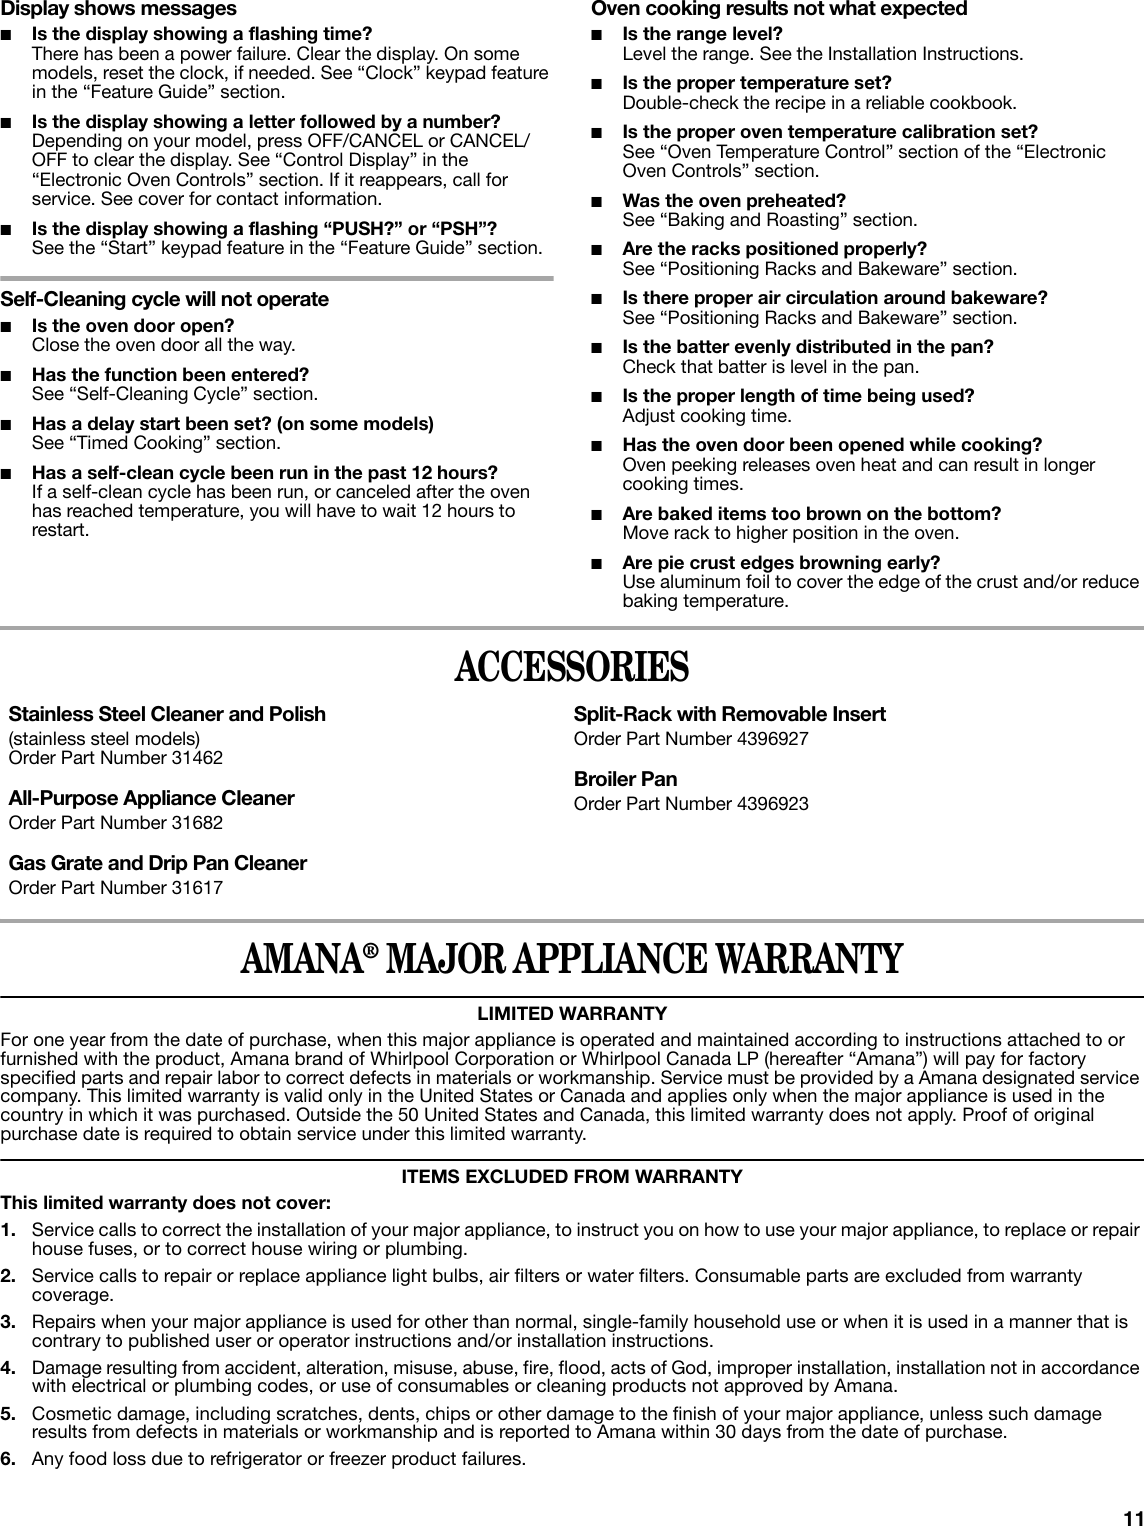 Page 11 of 12 - Amana AGR5844VDW User Manual  To The 53254204-a857-4e8d-90a1-9af2f4d37c3f